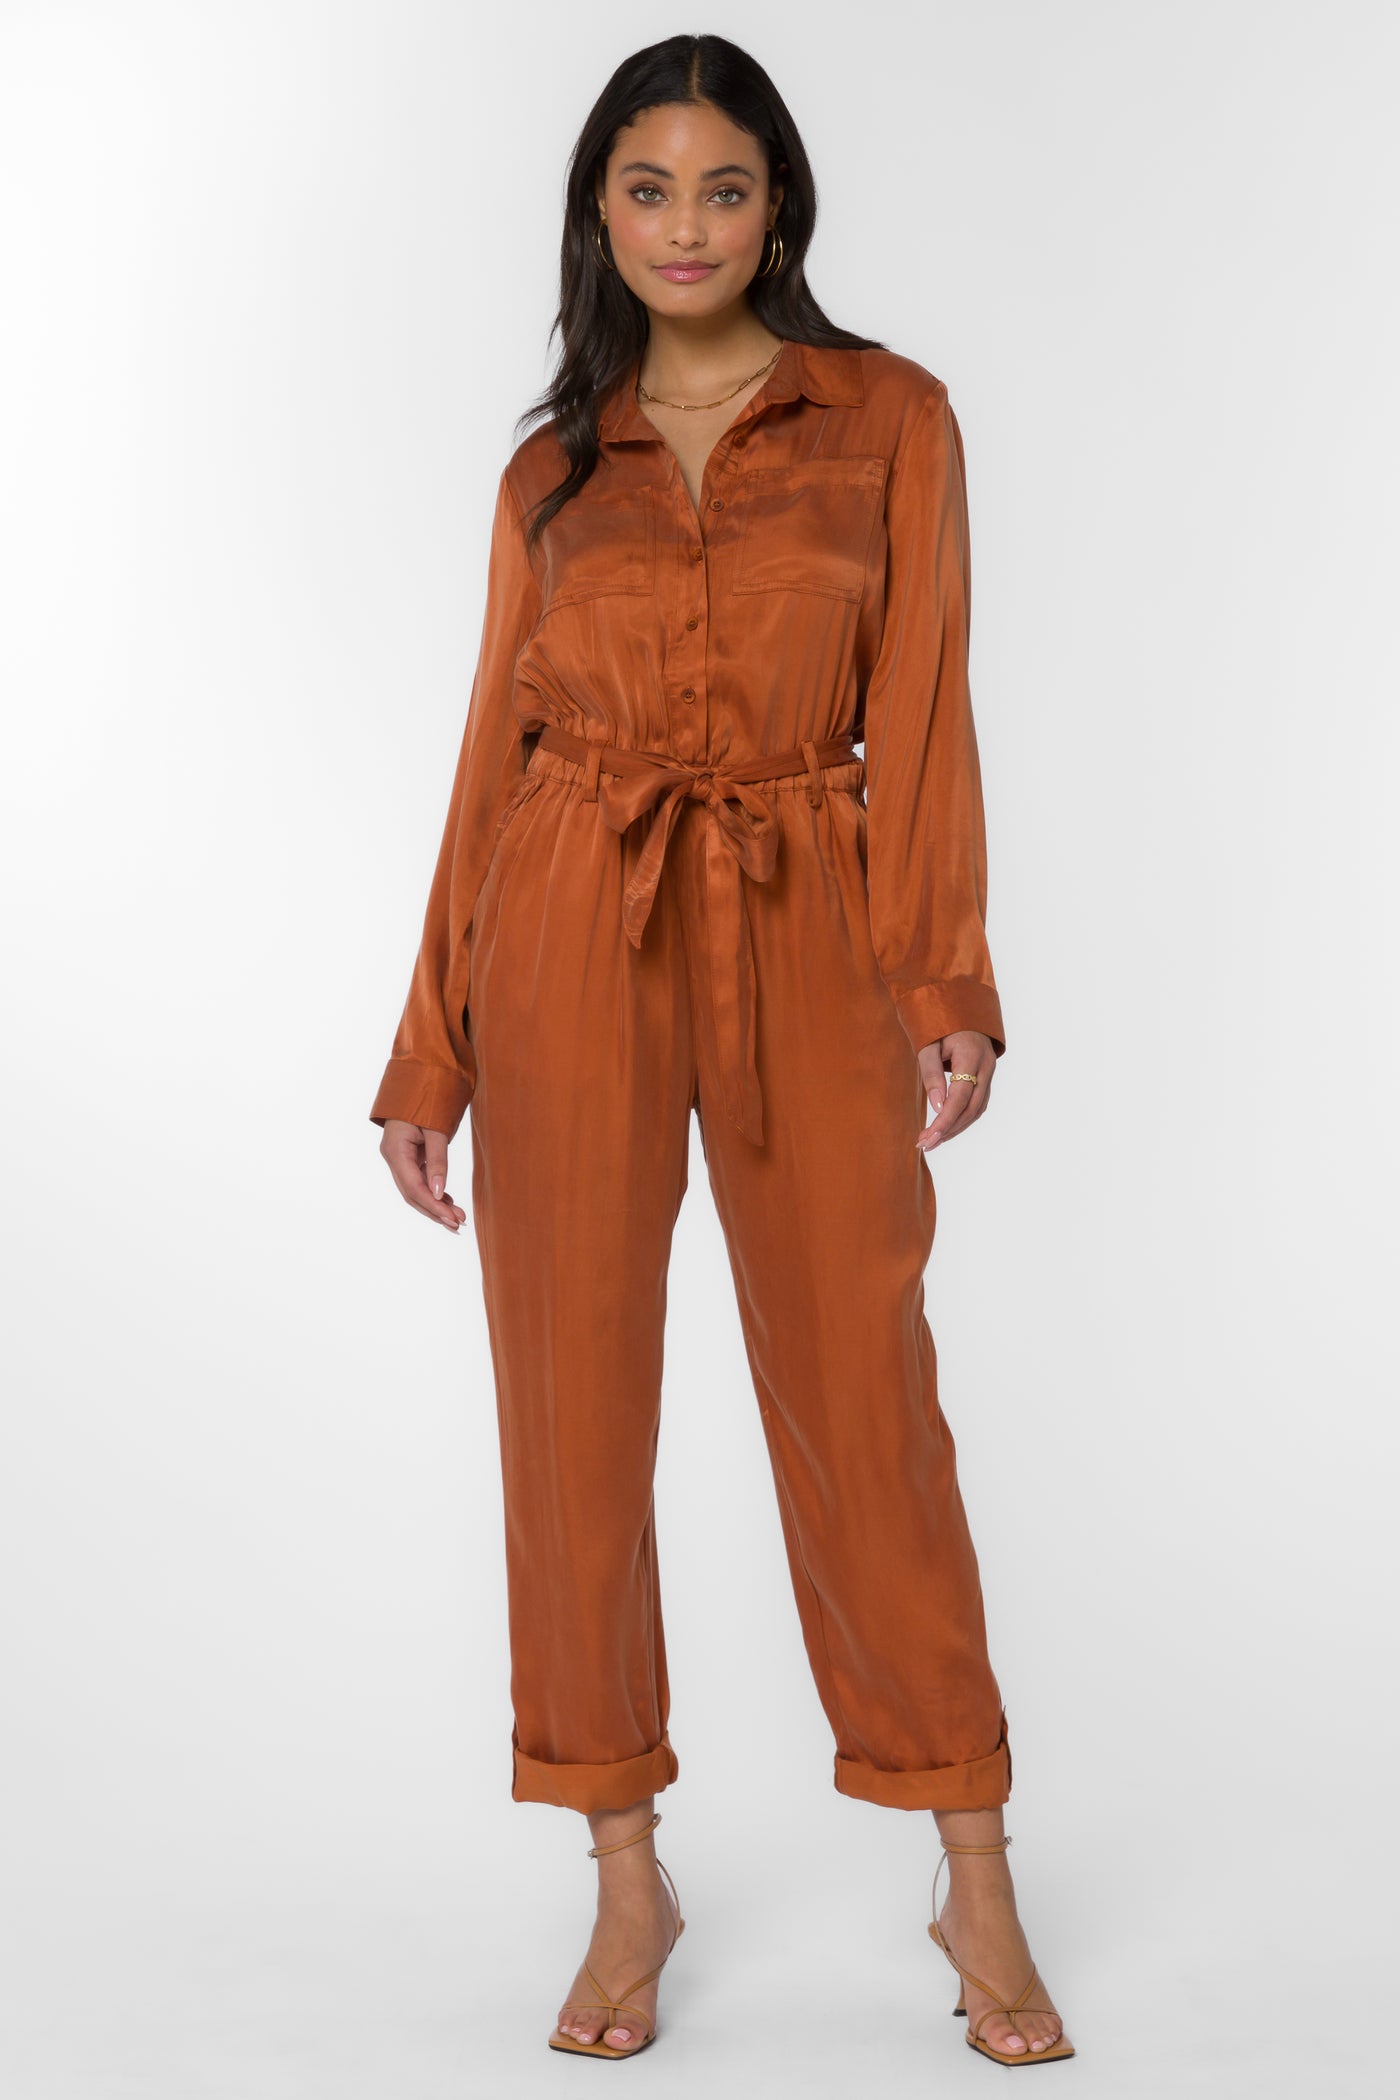 Rory Maple Jumpsuit - Jumpsuits & Rompers - Velvet Heart Clothing